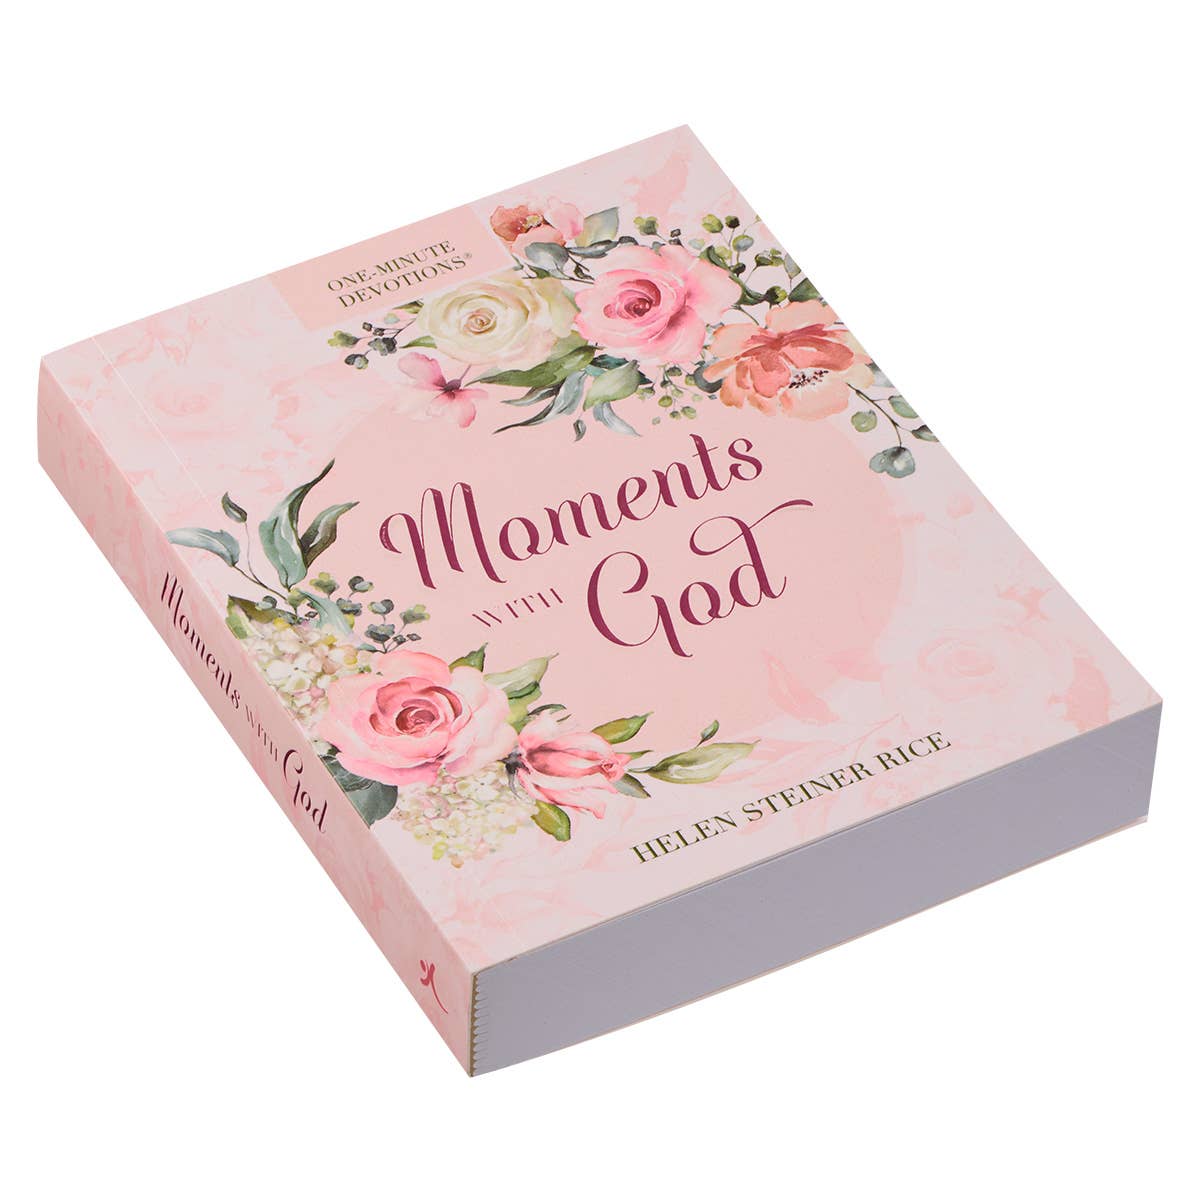 Moments with God Pink Softcover One-Minute Devotions